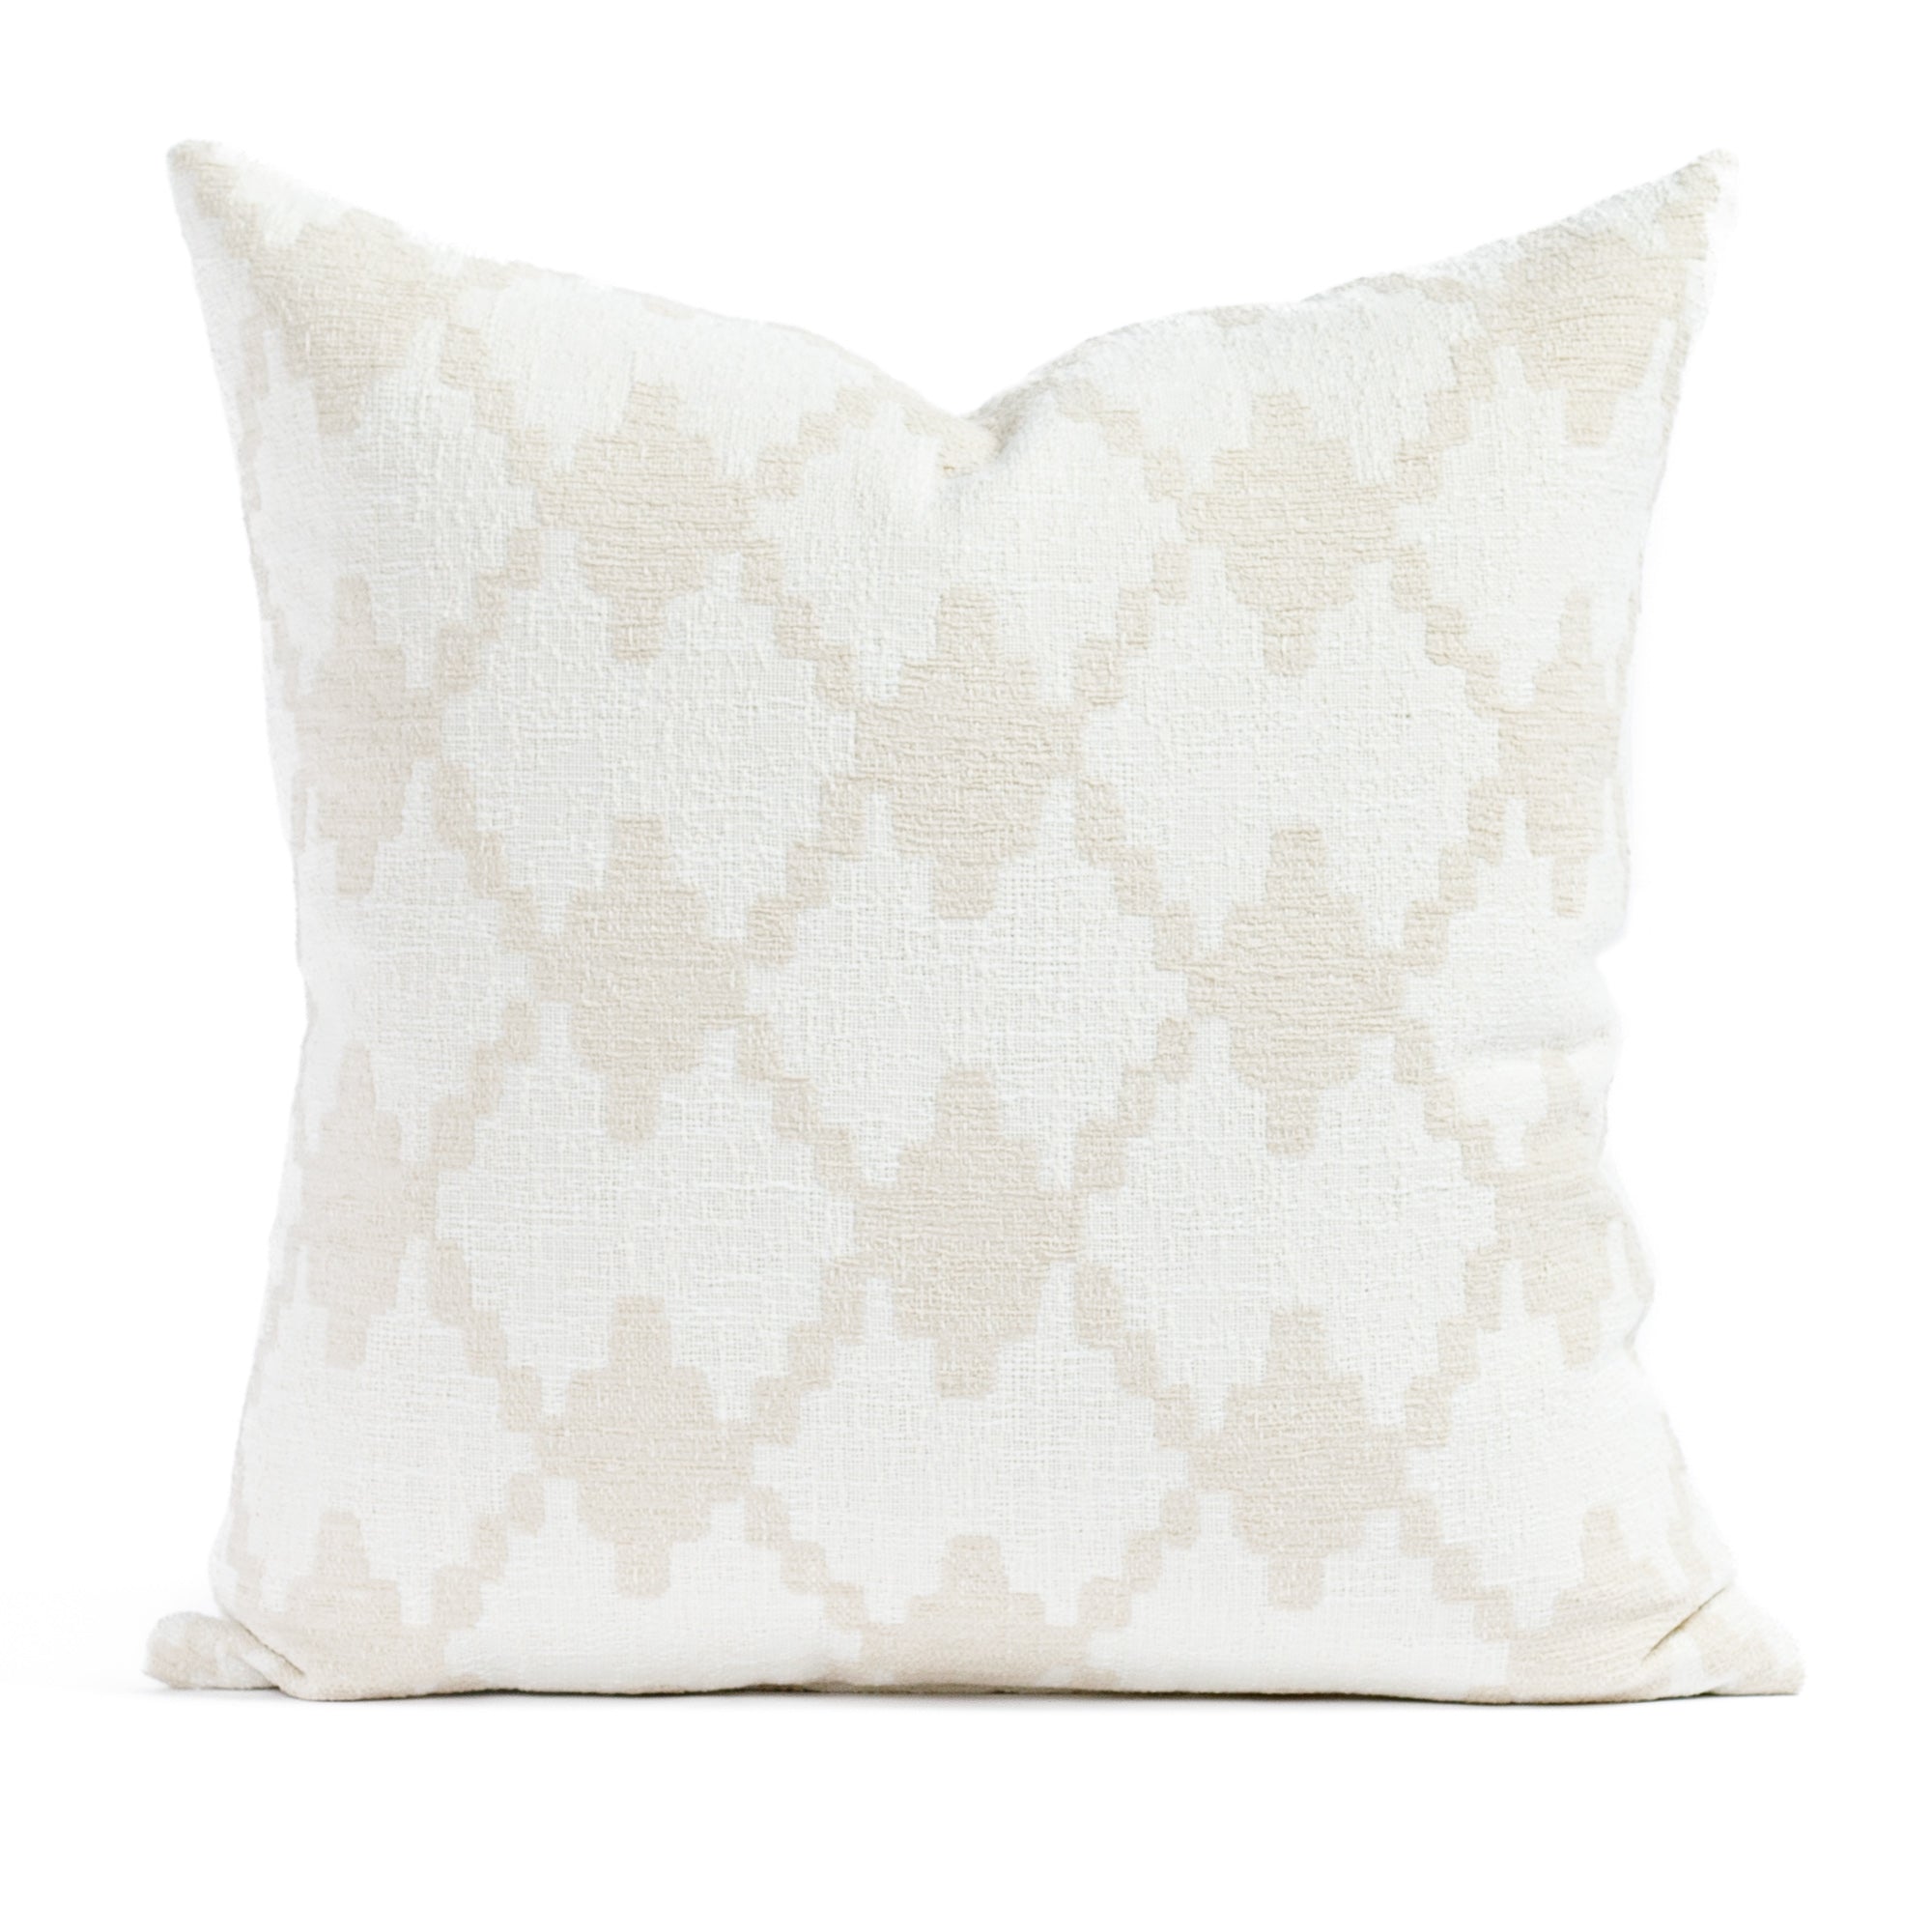 Fez 20x20 Pillow Toasted coconut, a white and beige diamond trellis patterned outdoor Tonic Living Pillow